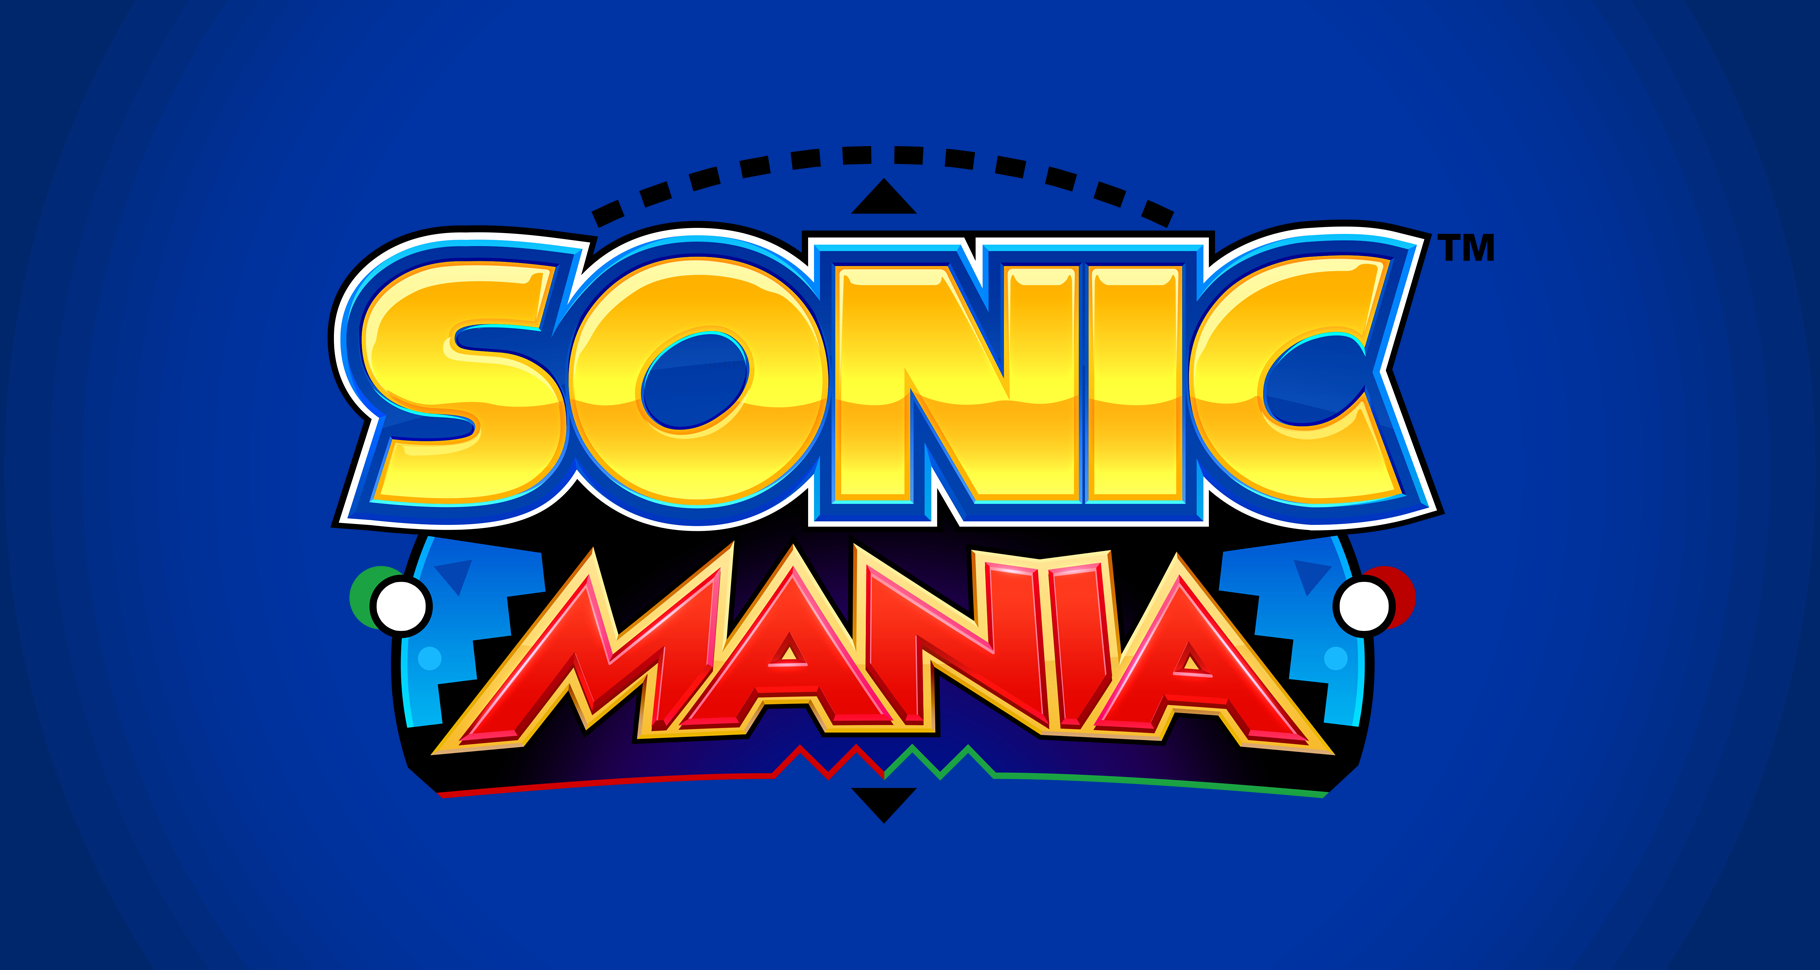 Sonic Mania Background/Thumbnail for YouTube by Turret3471 on DeviantArt